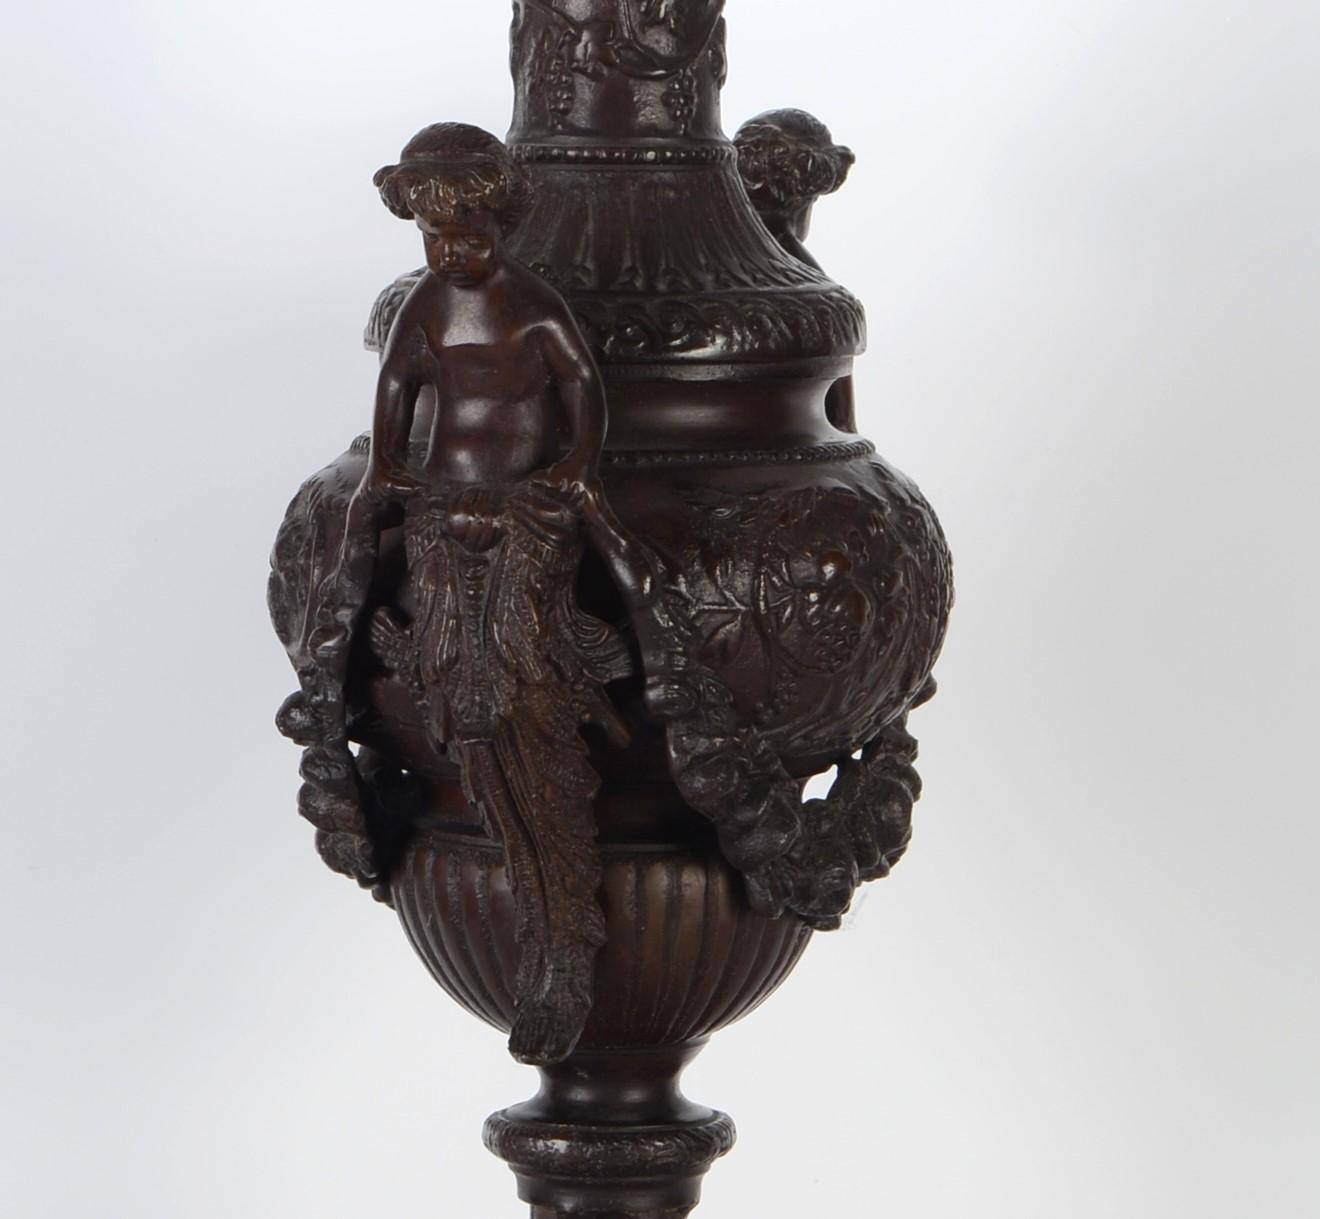 Neoclassical Revival Lamp, Vase and Grotesques, Bronze, Marble, No Shade Included